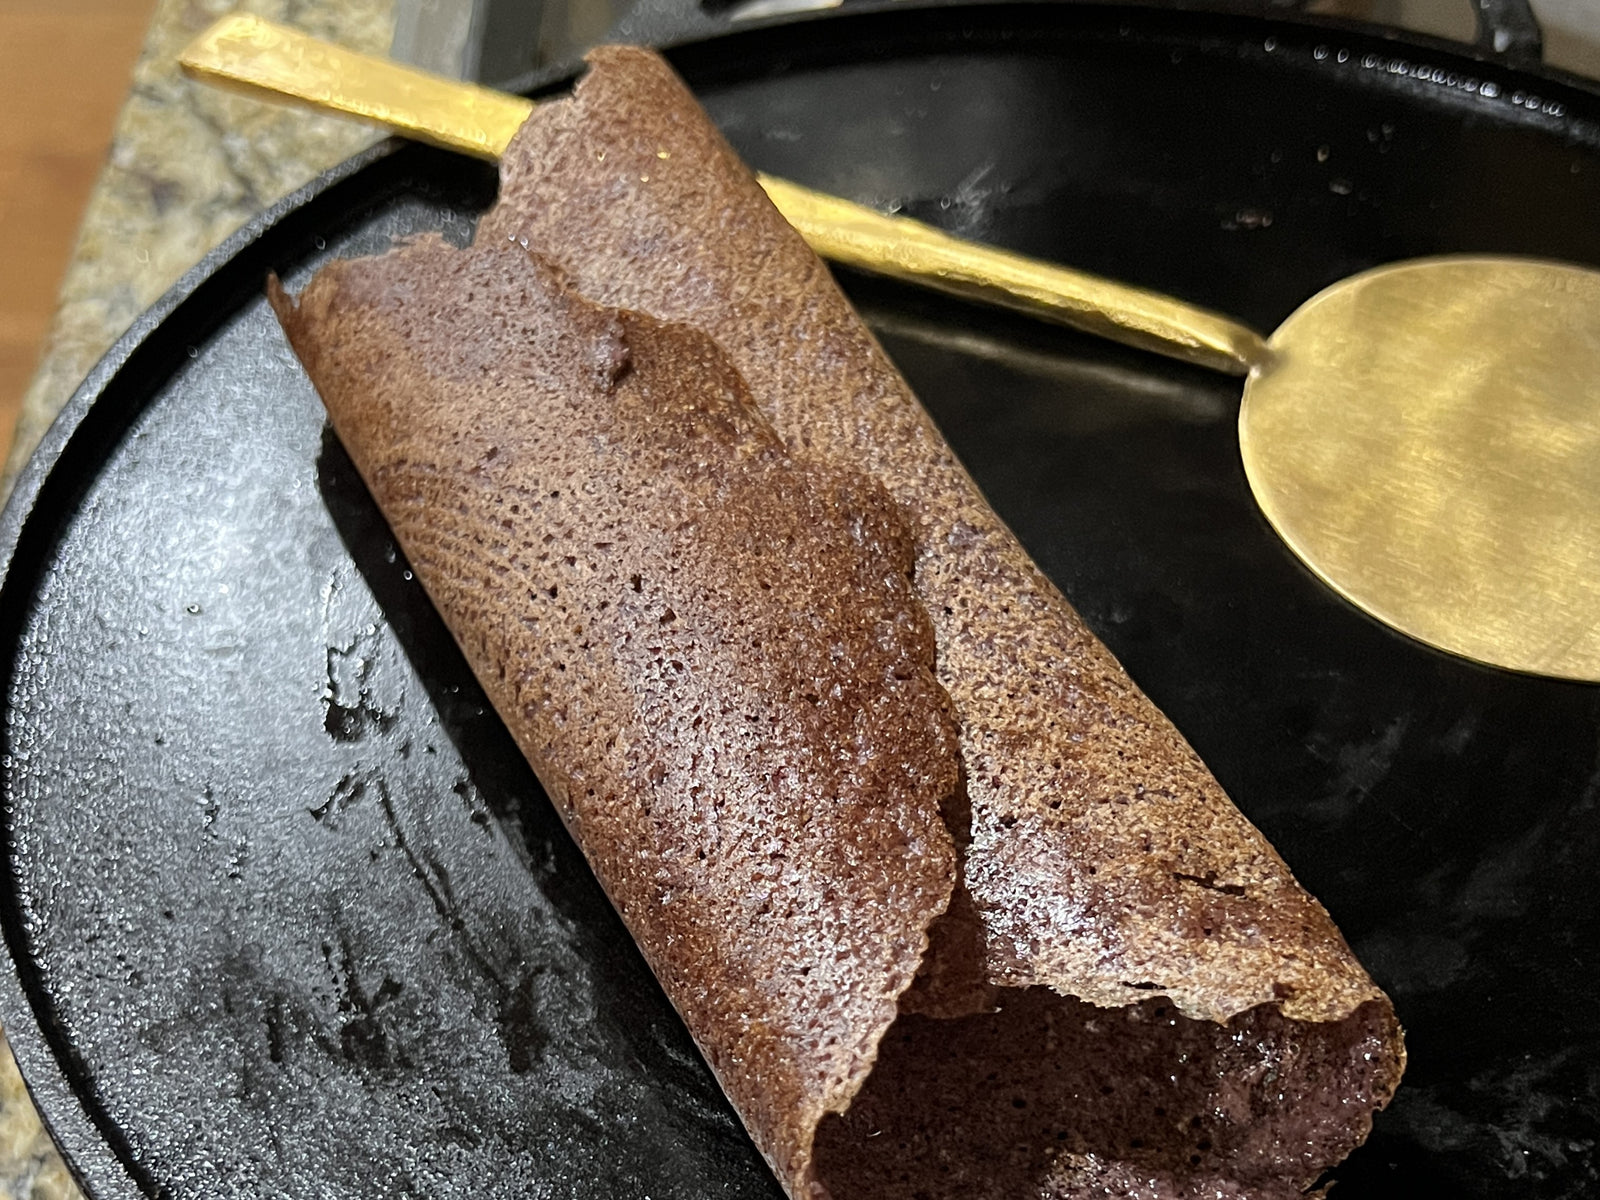 Learn to make dosa - a South Indian classic!